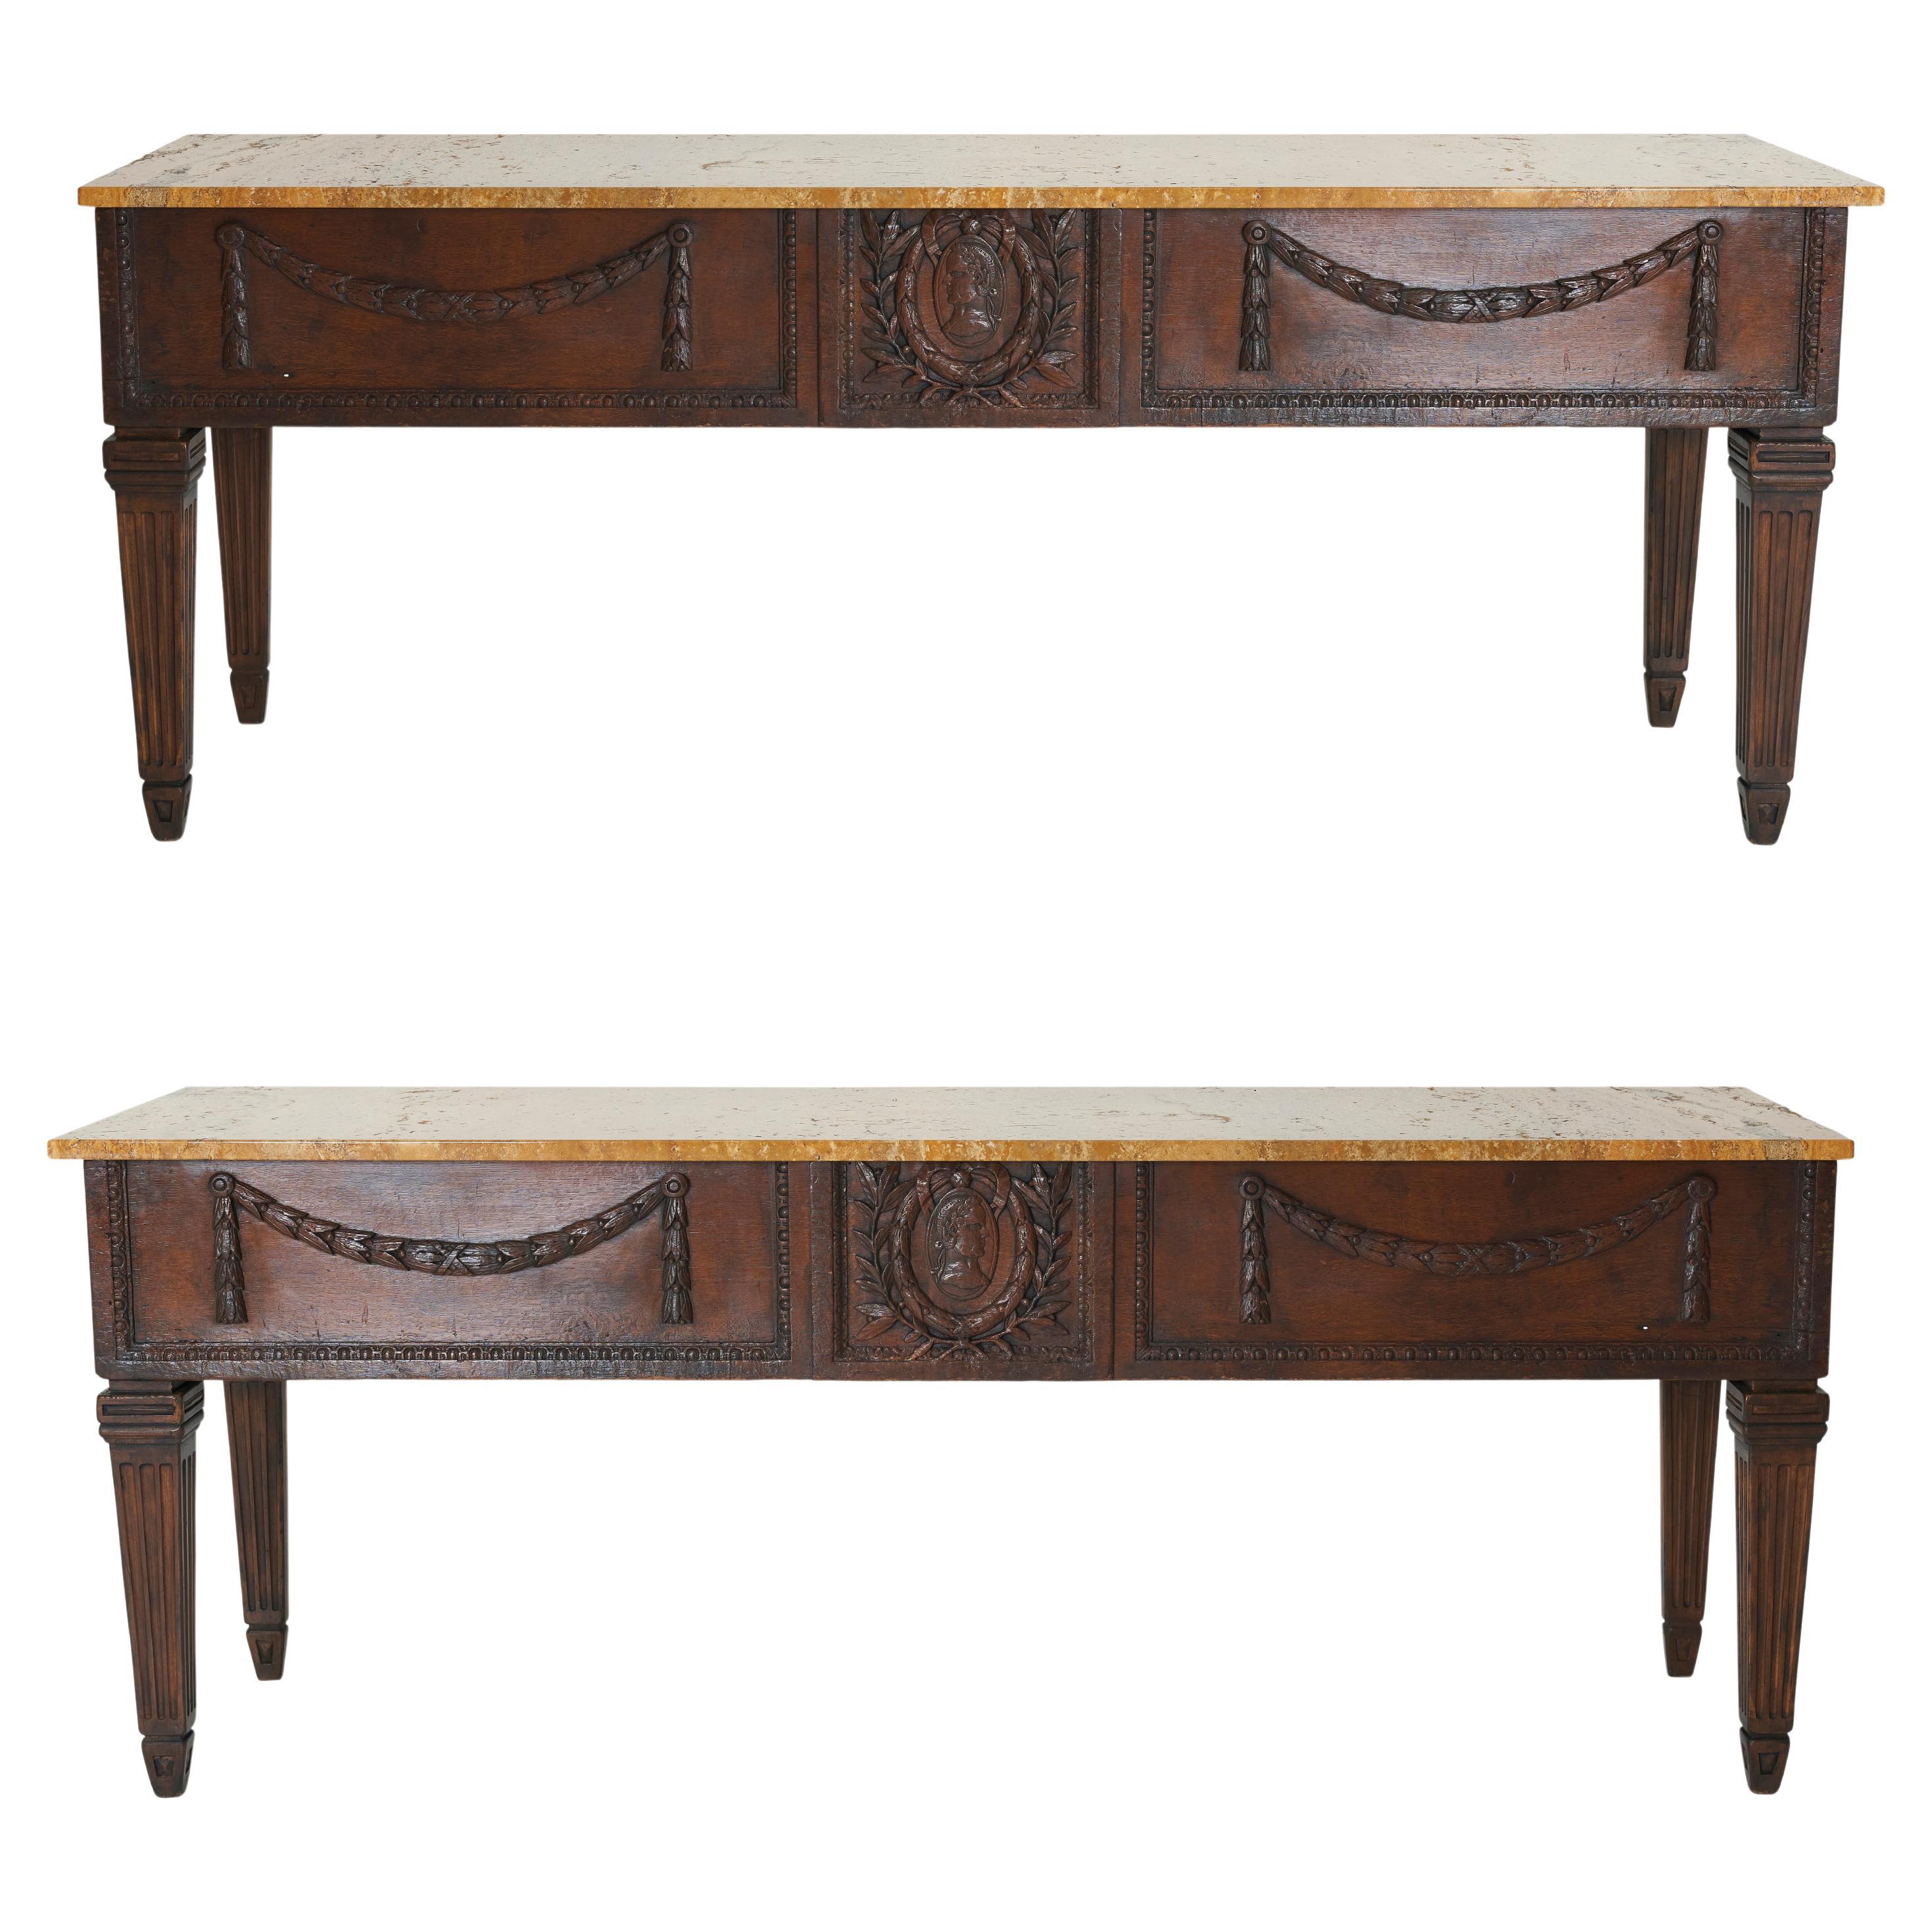 A Pair of Neoclassical Style Consoles with Ocher Travertine Tops by Billy Haines